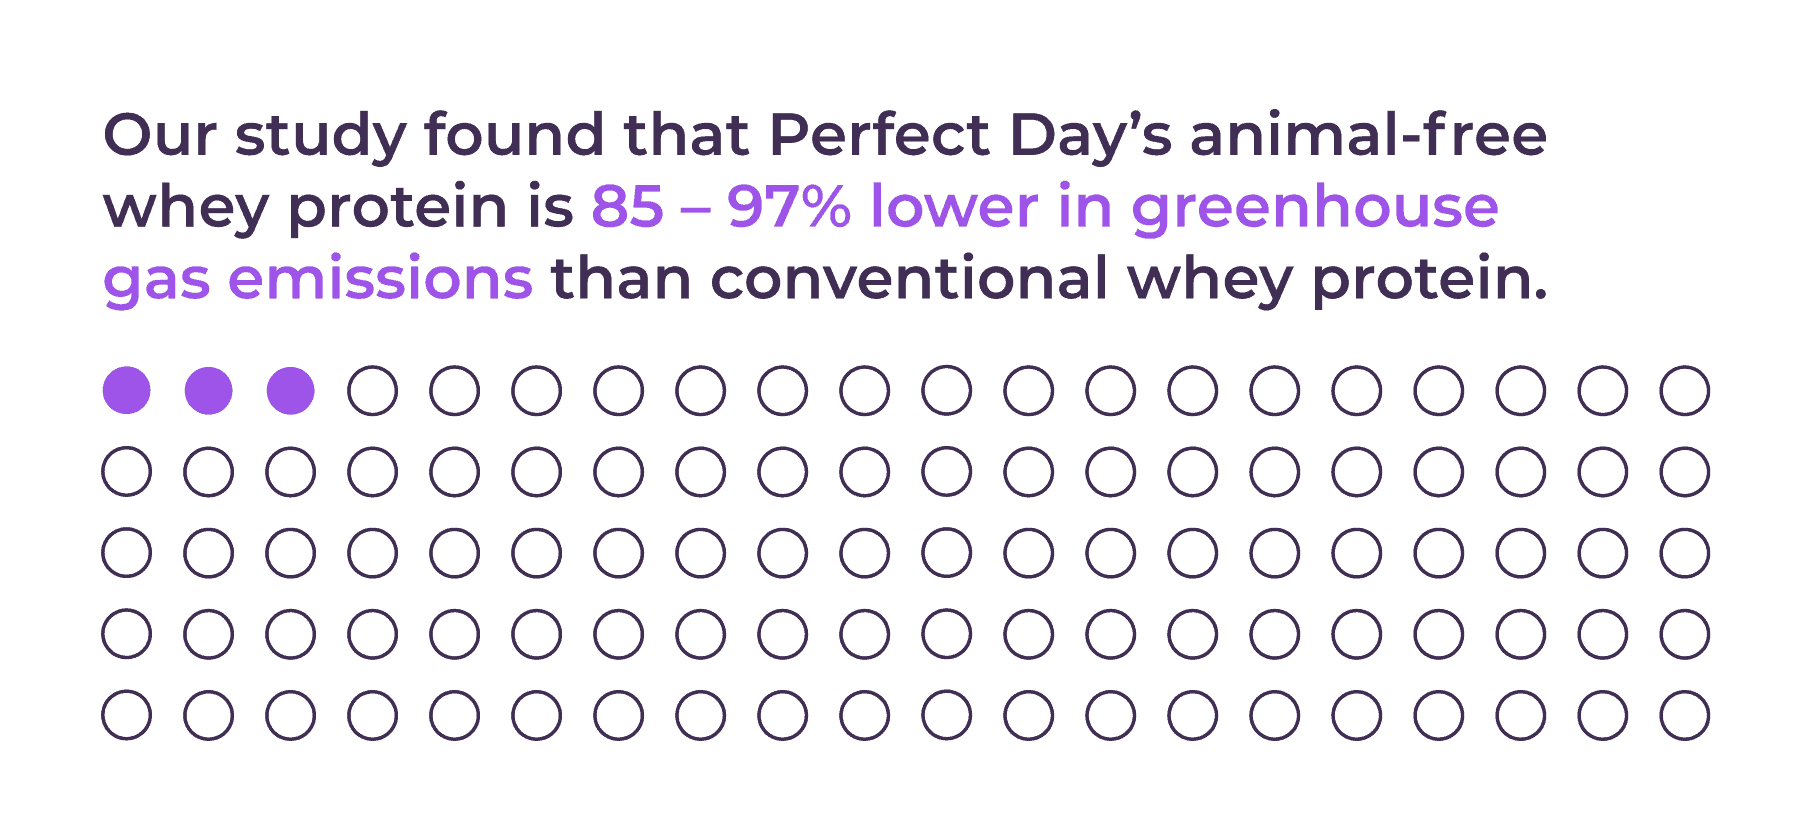 Perfect Day's animal-free whey protein is 85-97% lower in greenhouse gas emissions than conventional whey protein